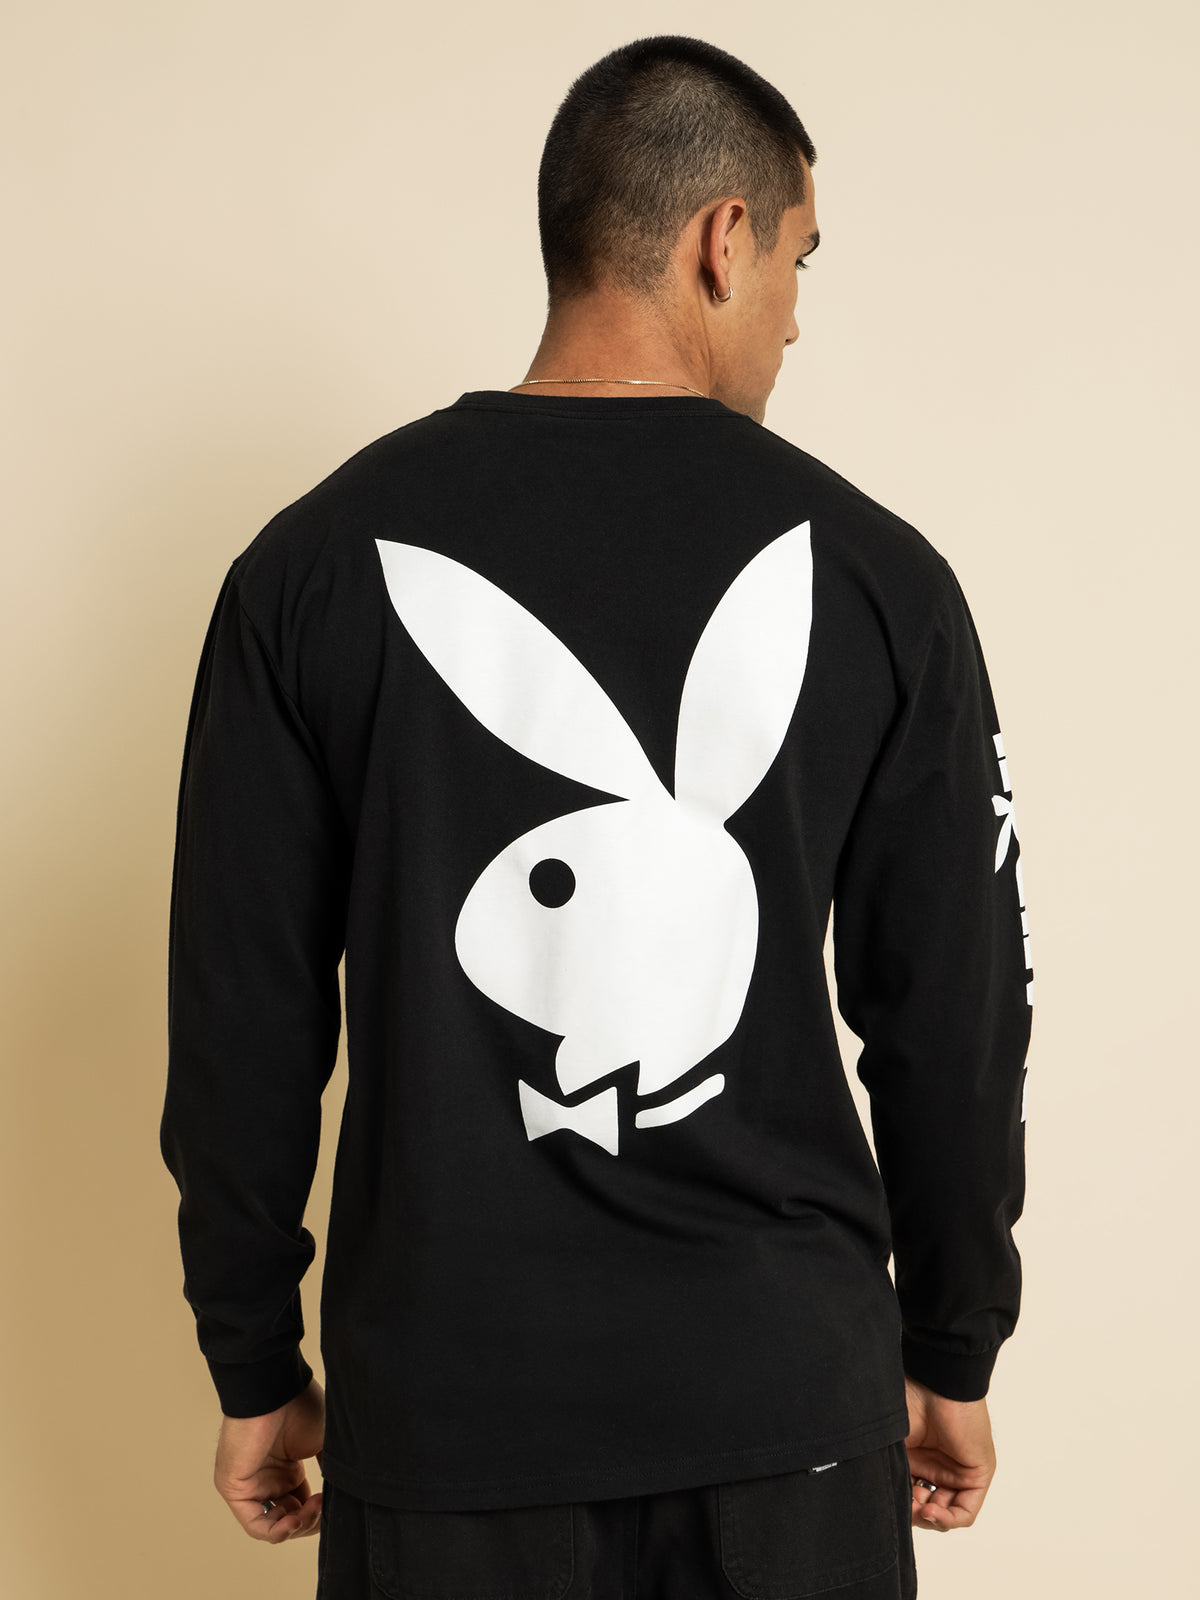 Big Bunny Stack Long Sleeve T-Shirt in Black